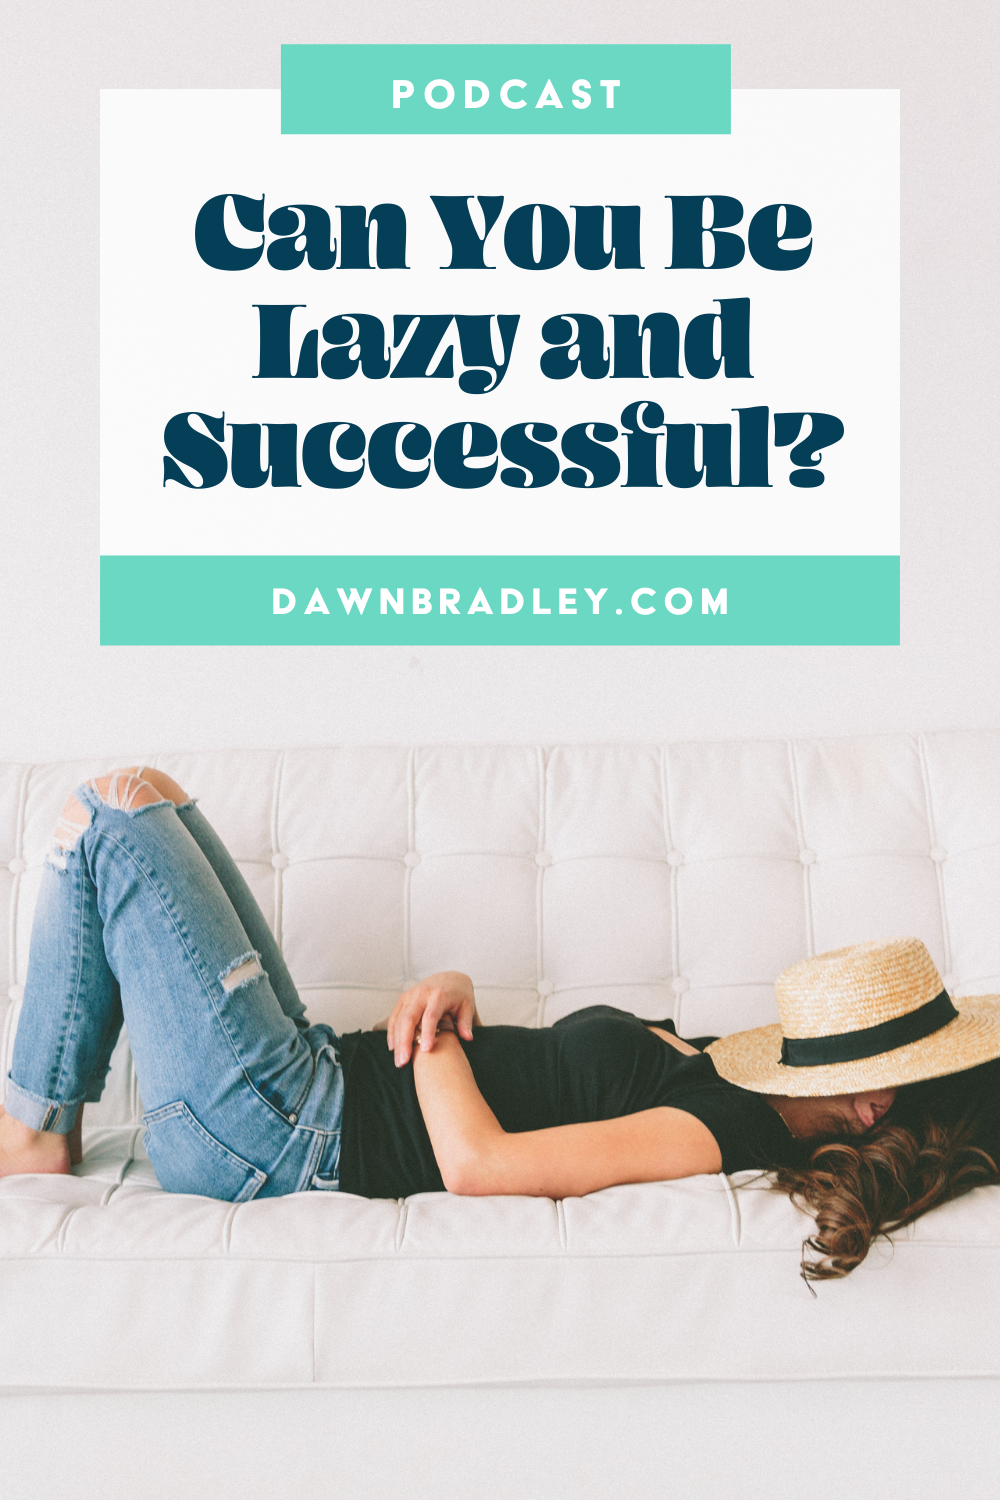 a person is laying on a white couch, they are wearing ripped blue jeans and a black shirt their face is covered with a straw sun hat. The text overlay reads "can you be lazy and successful?"